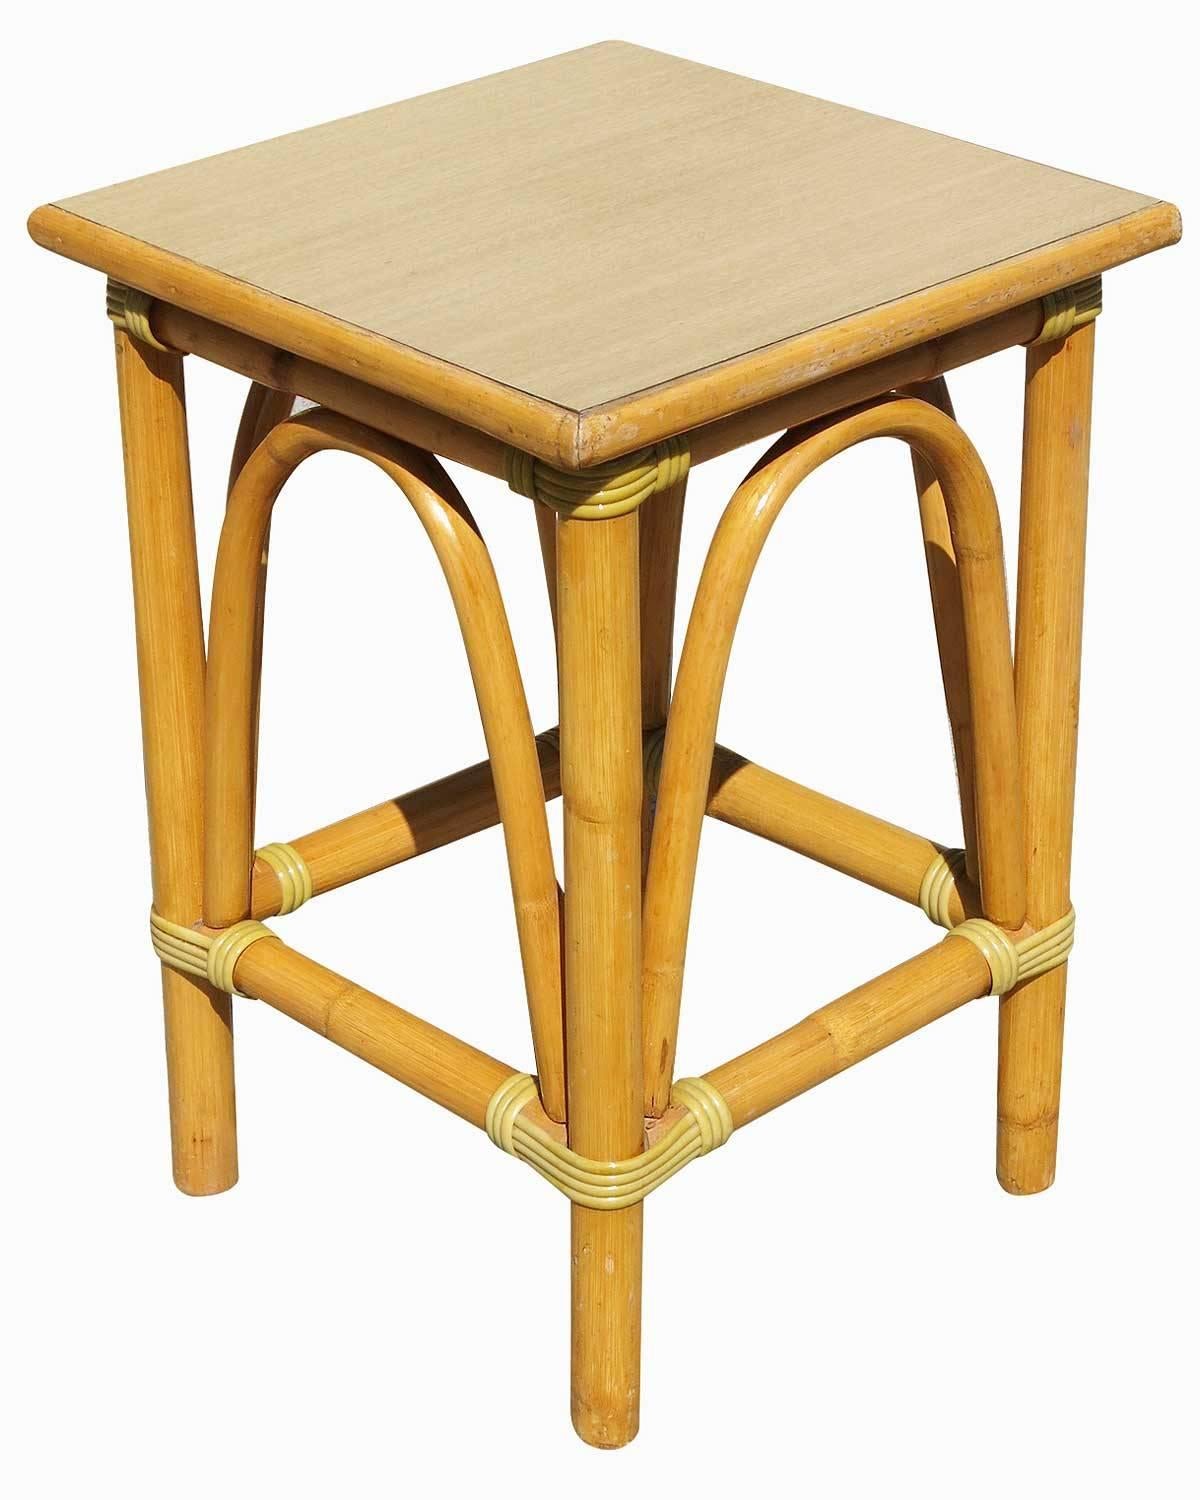 Simply yet elegant small rattan side table with steam pressed arched sides and blond wood grain top. The table features Classic wicker wrappings and Mid-Century appeal,

circa 1950.

Designed in the manner of Paul Frankl.


Restored to new for